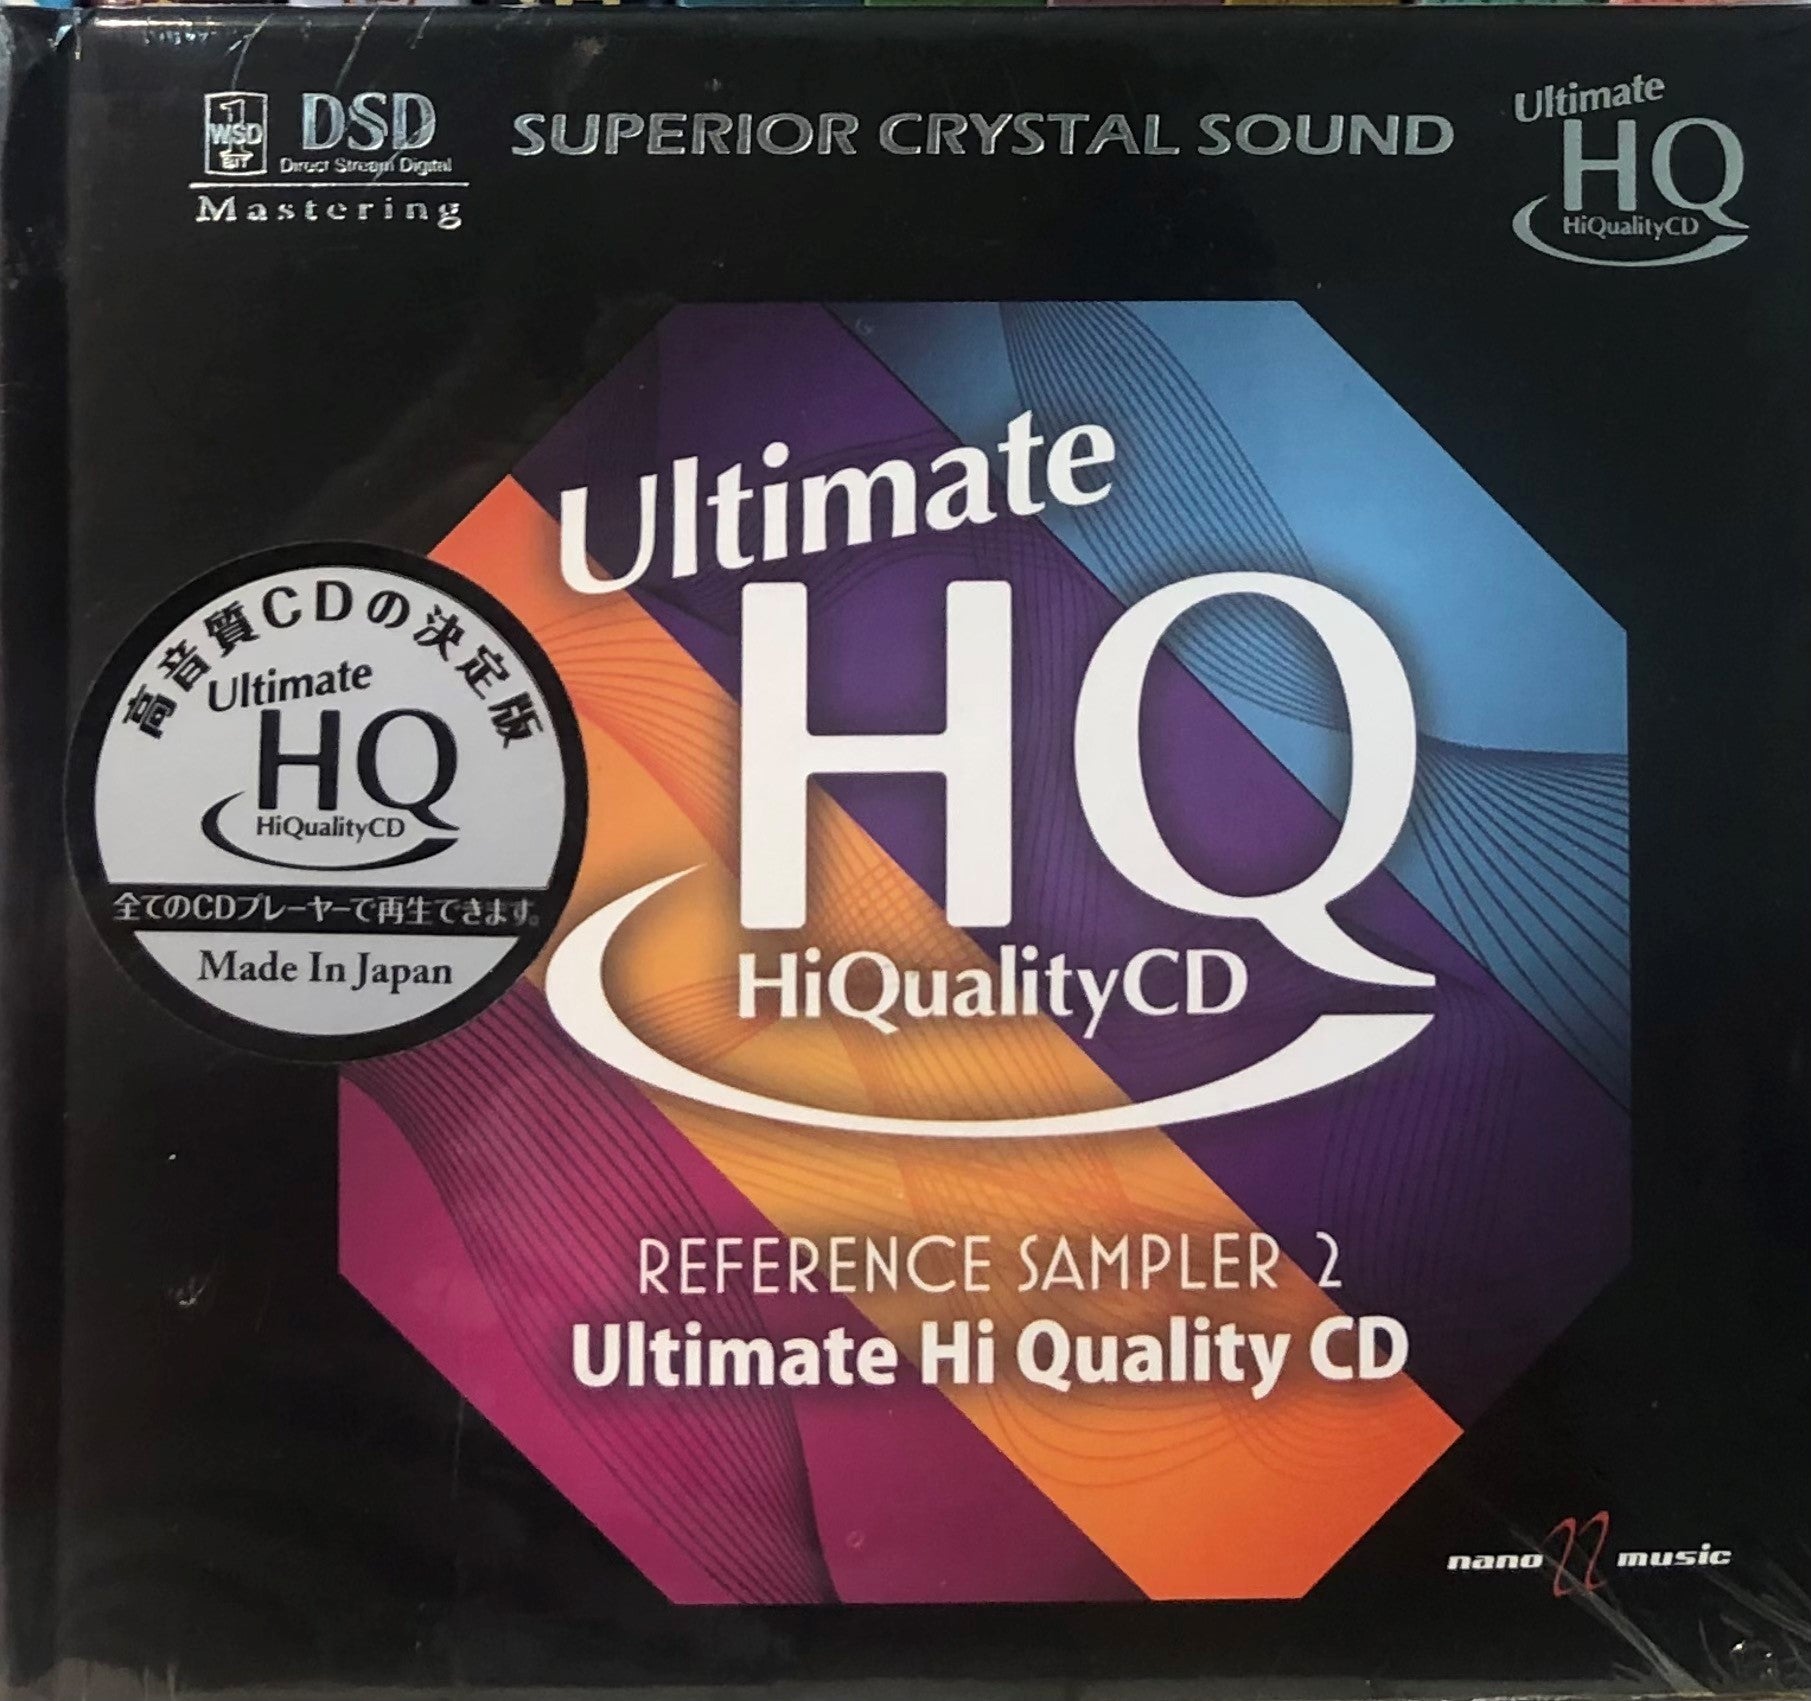 ULTIMATE REFERENCE SAMPLER 2 - VARIOUS ARTISTS (UHQCD) CD MADE IN JAPAN